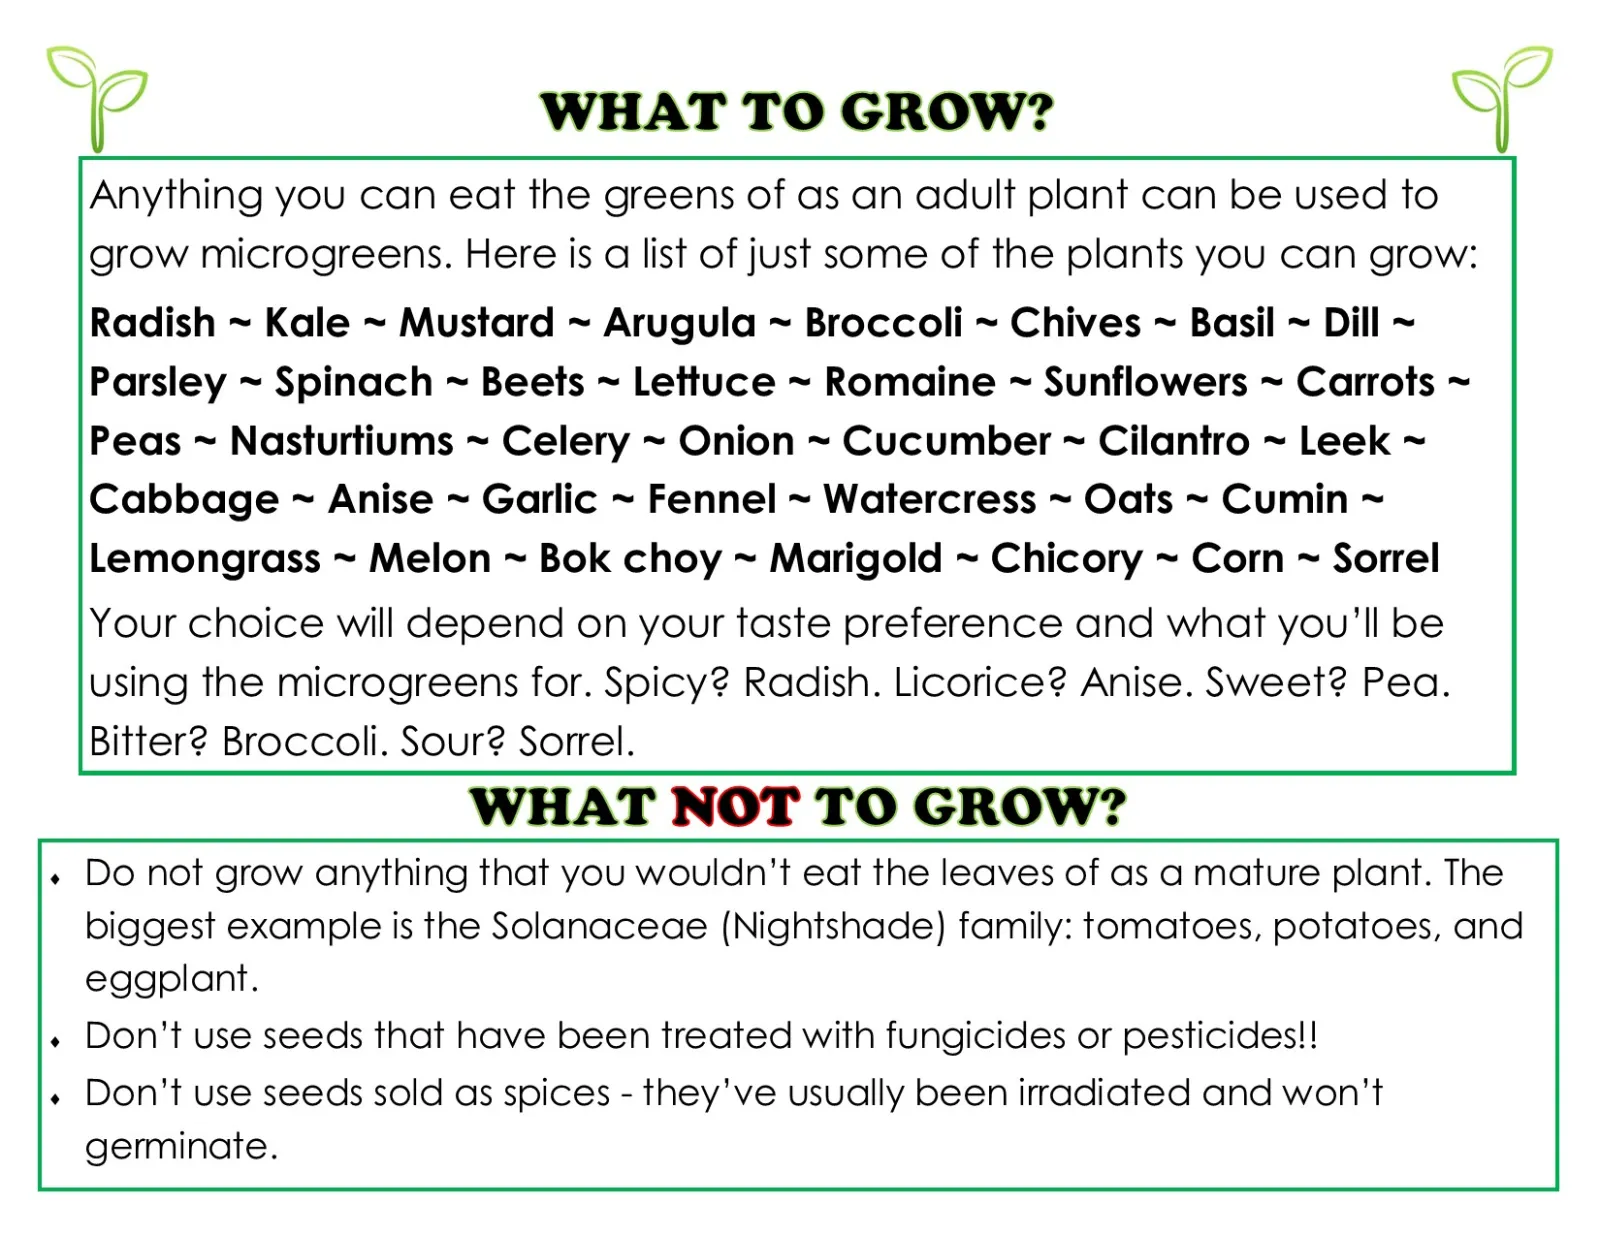 This is a wall of text about what seeds to use and which ones you should not